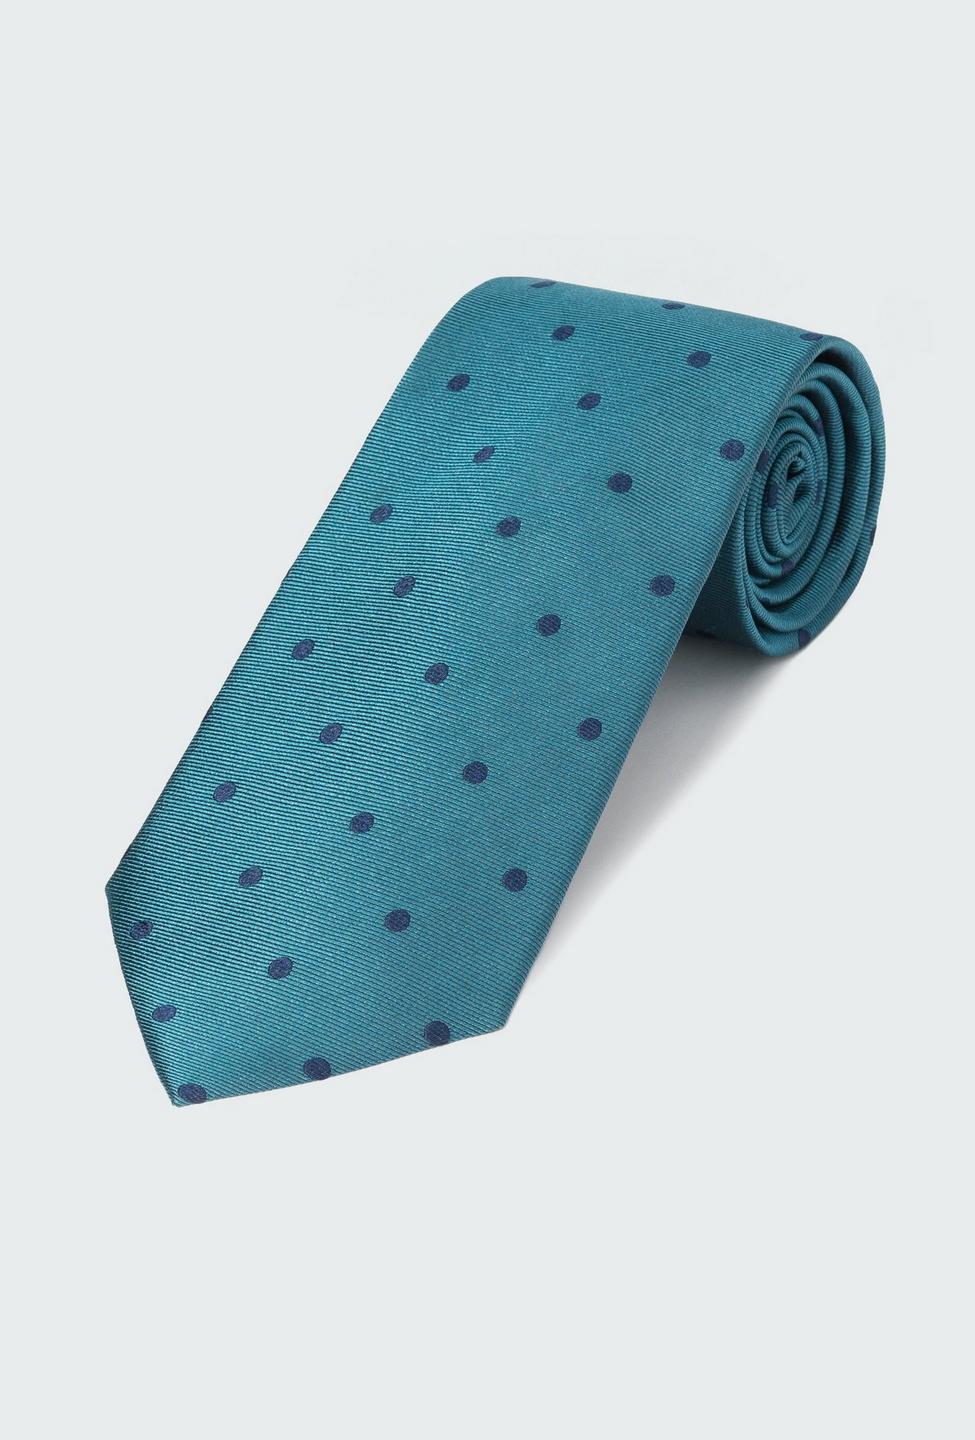 Blue and Green tie - Pattern Design from Indochino Collection